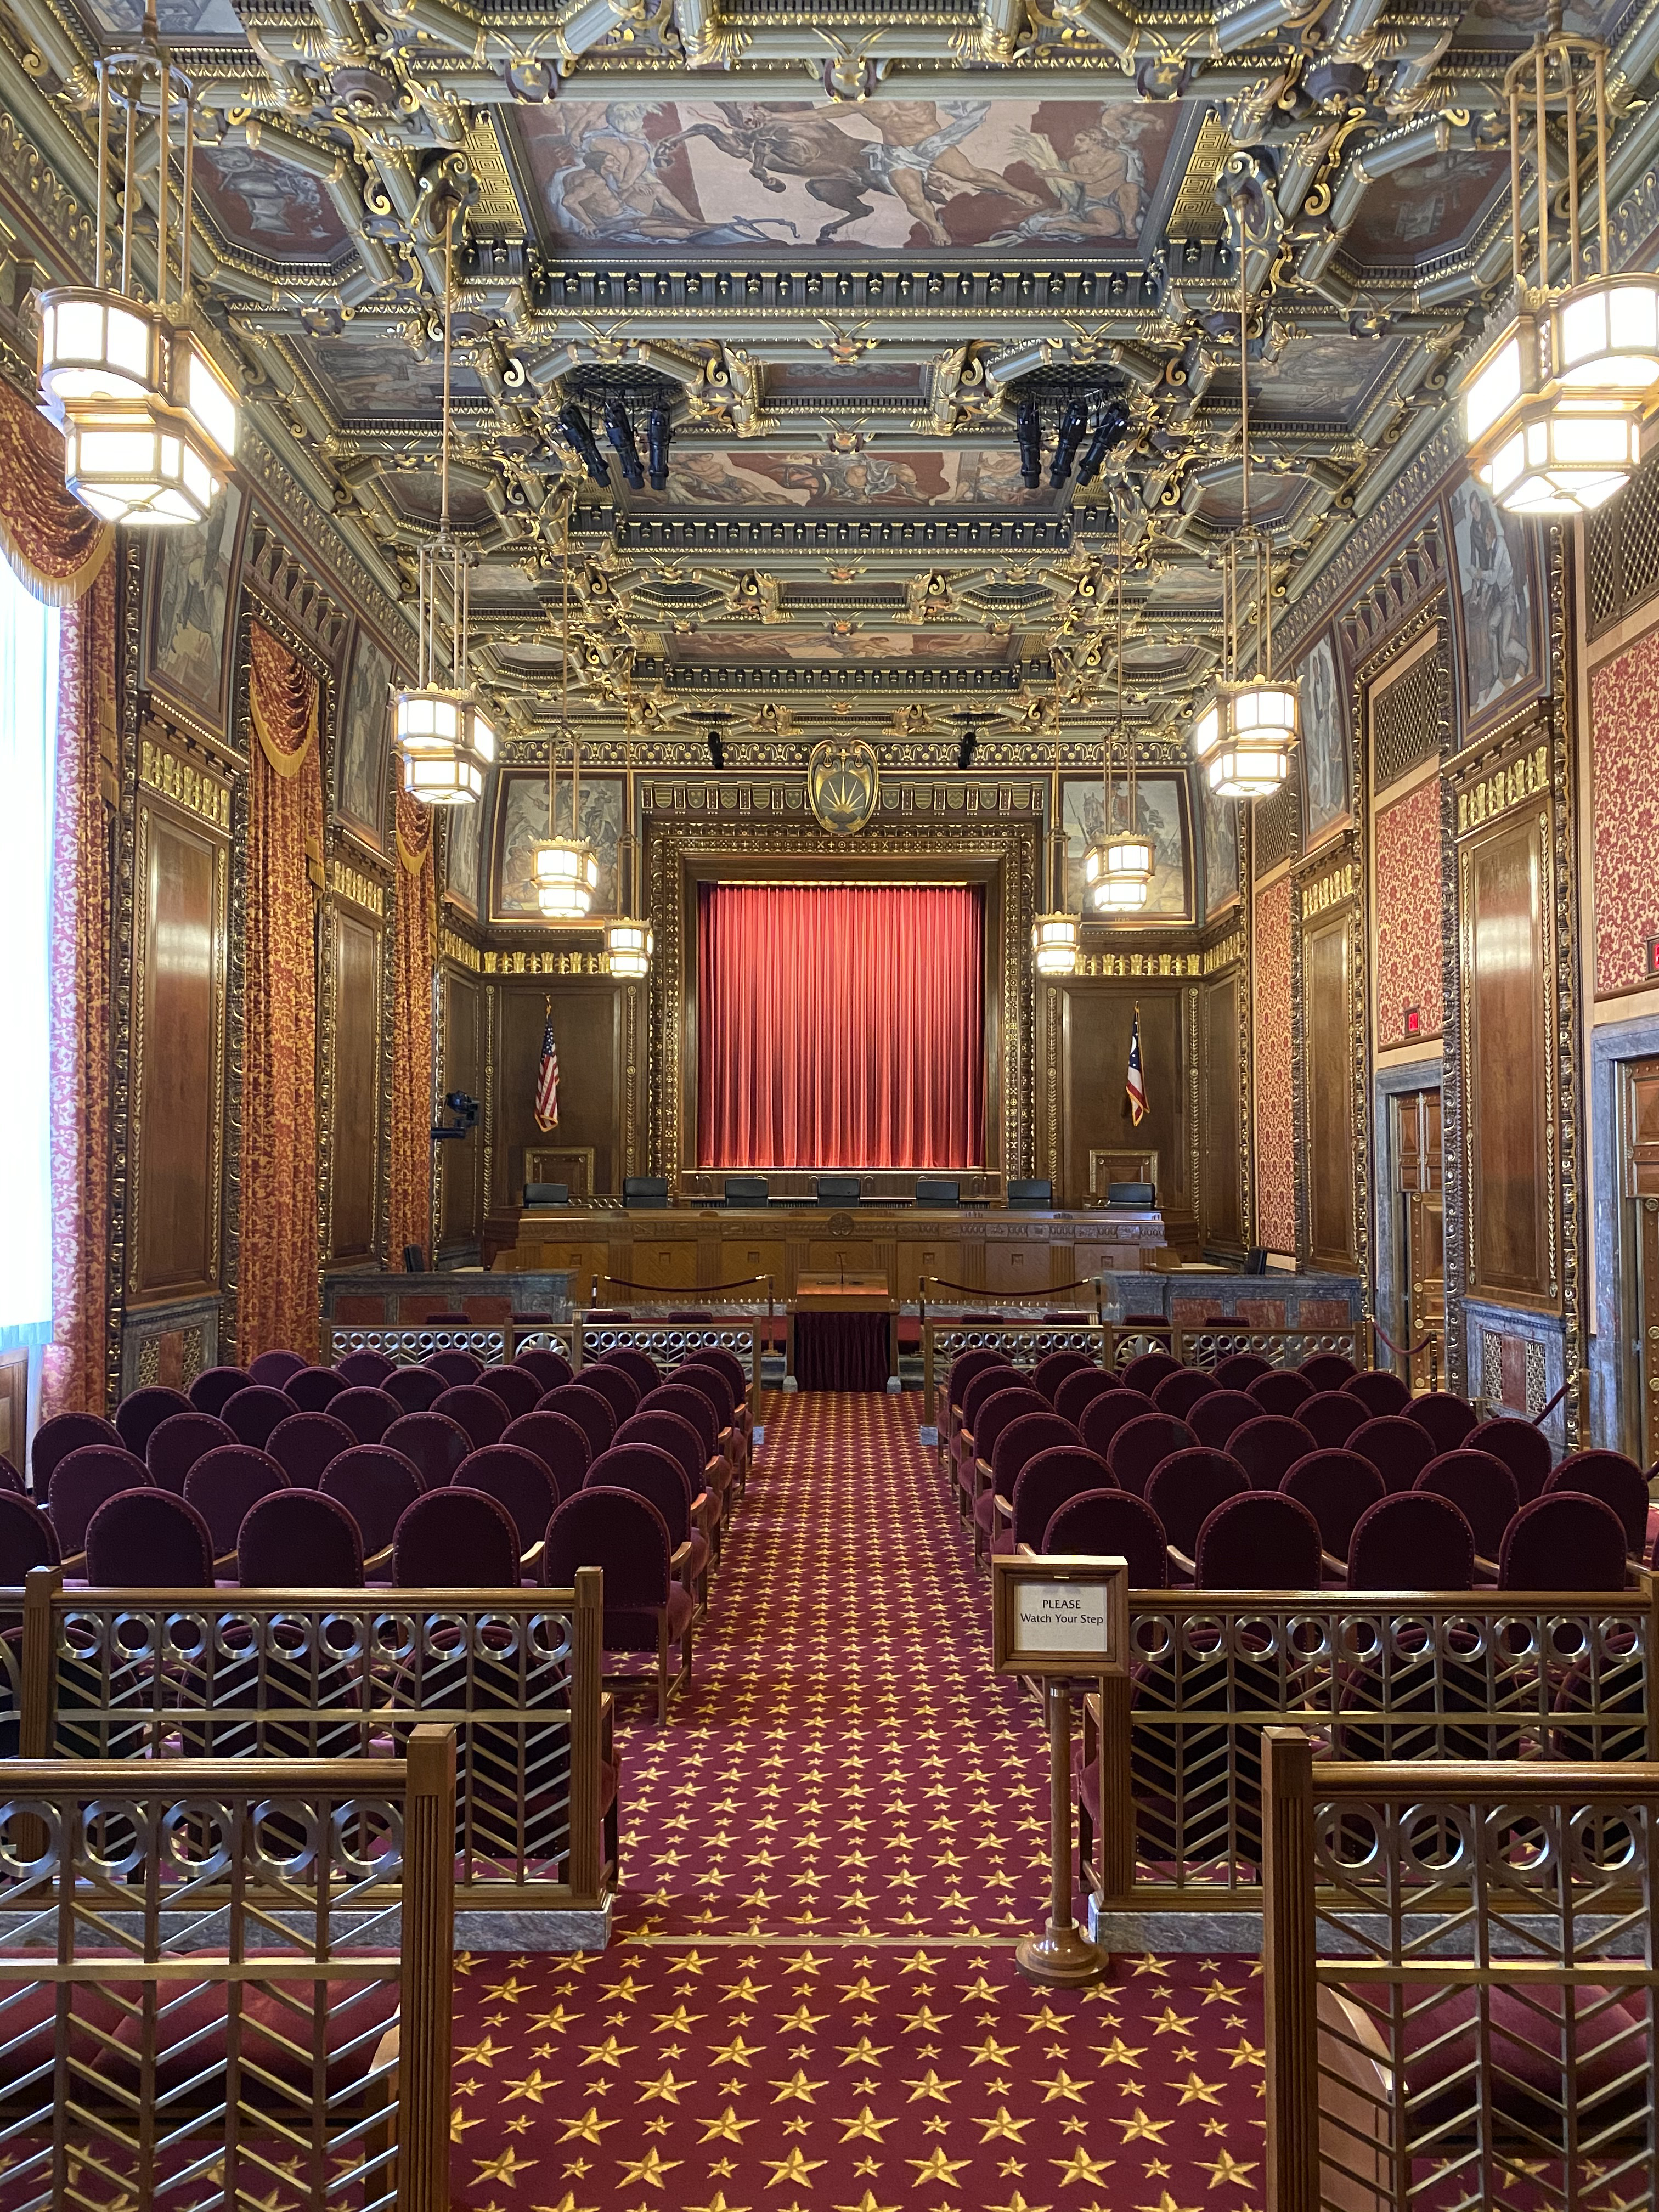 The courtroom of the Supreme Court of Ohio where the chief justice and six justices hear oral arguments. The decisions made by this court become governing law in Ohio. The original artwork in this room was painted by Rudolph Scheffler and depict the history of Ohio.  